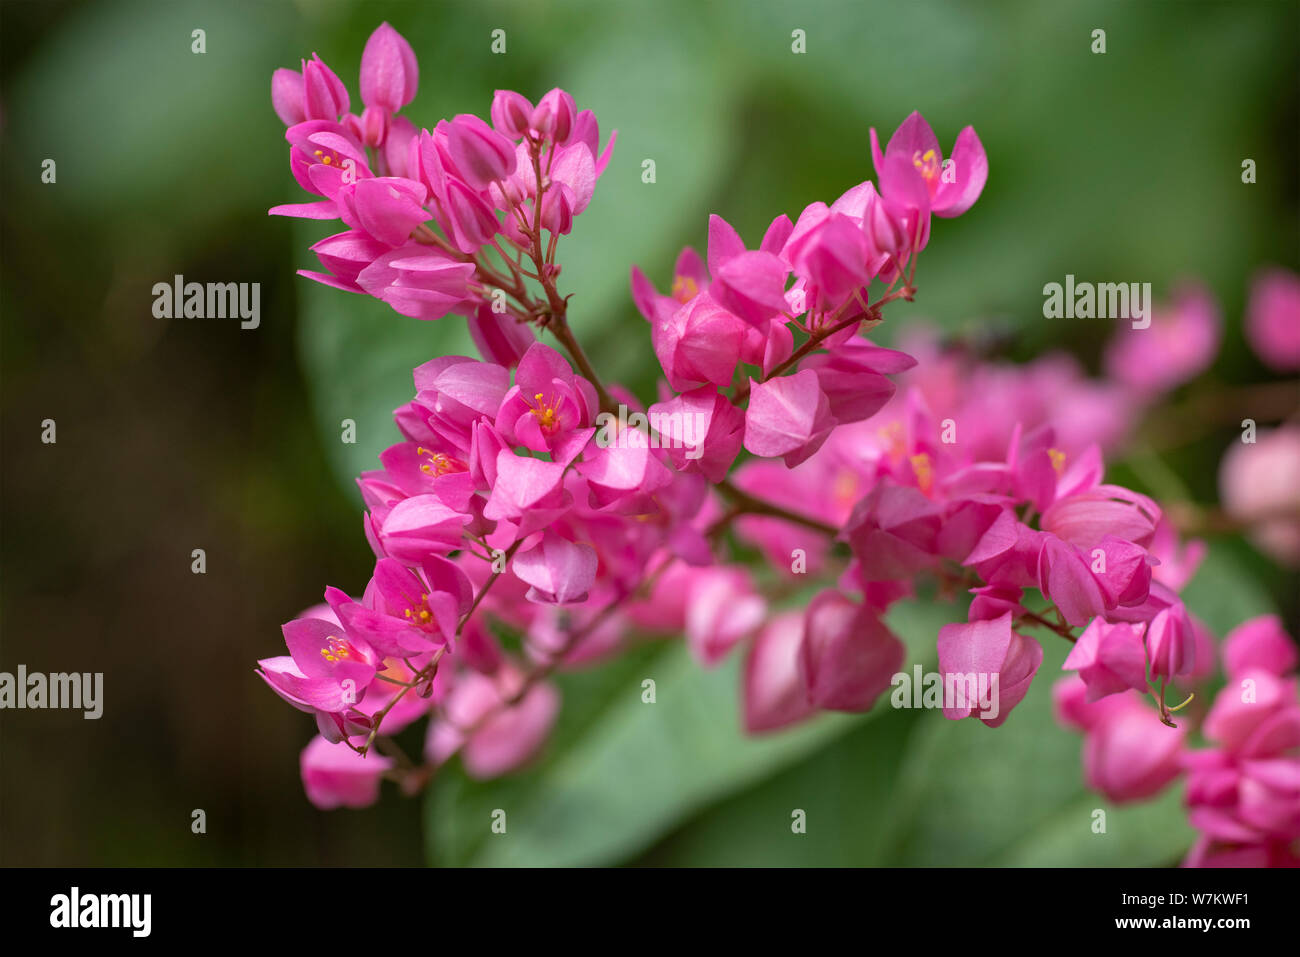 Clerodendrum Thompson (lat. Clerodendrum thomsonae) - flowers close-up. Thailand. Stock Photo